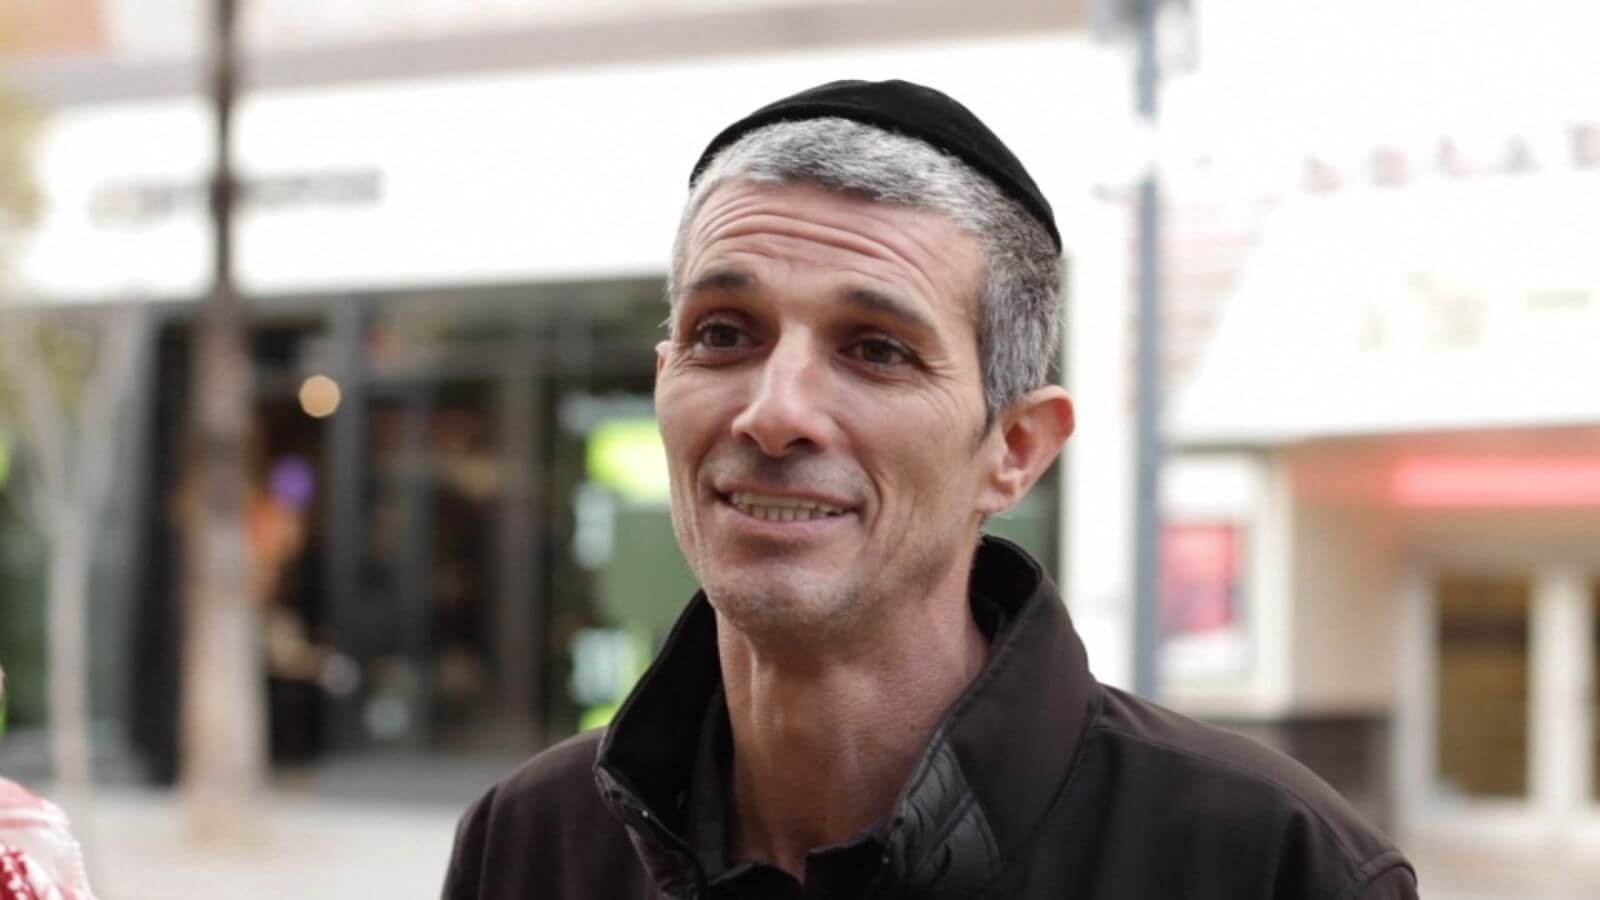 Older, thin Jewish man standing on the street talking and smiling